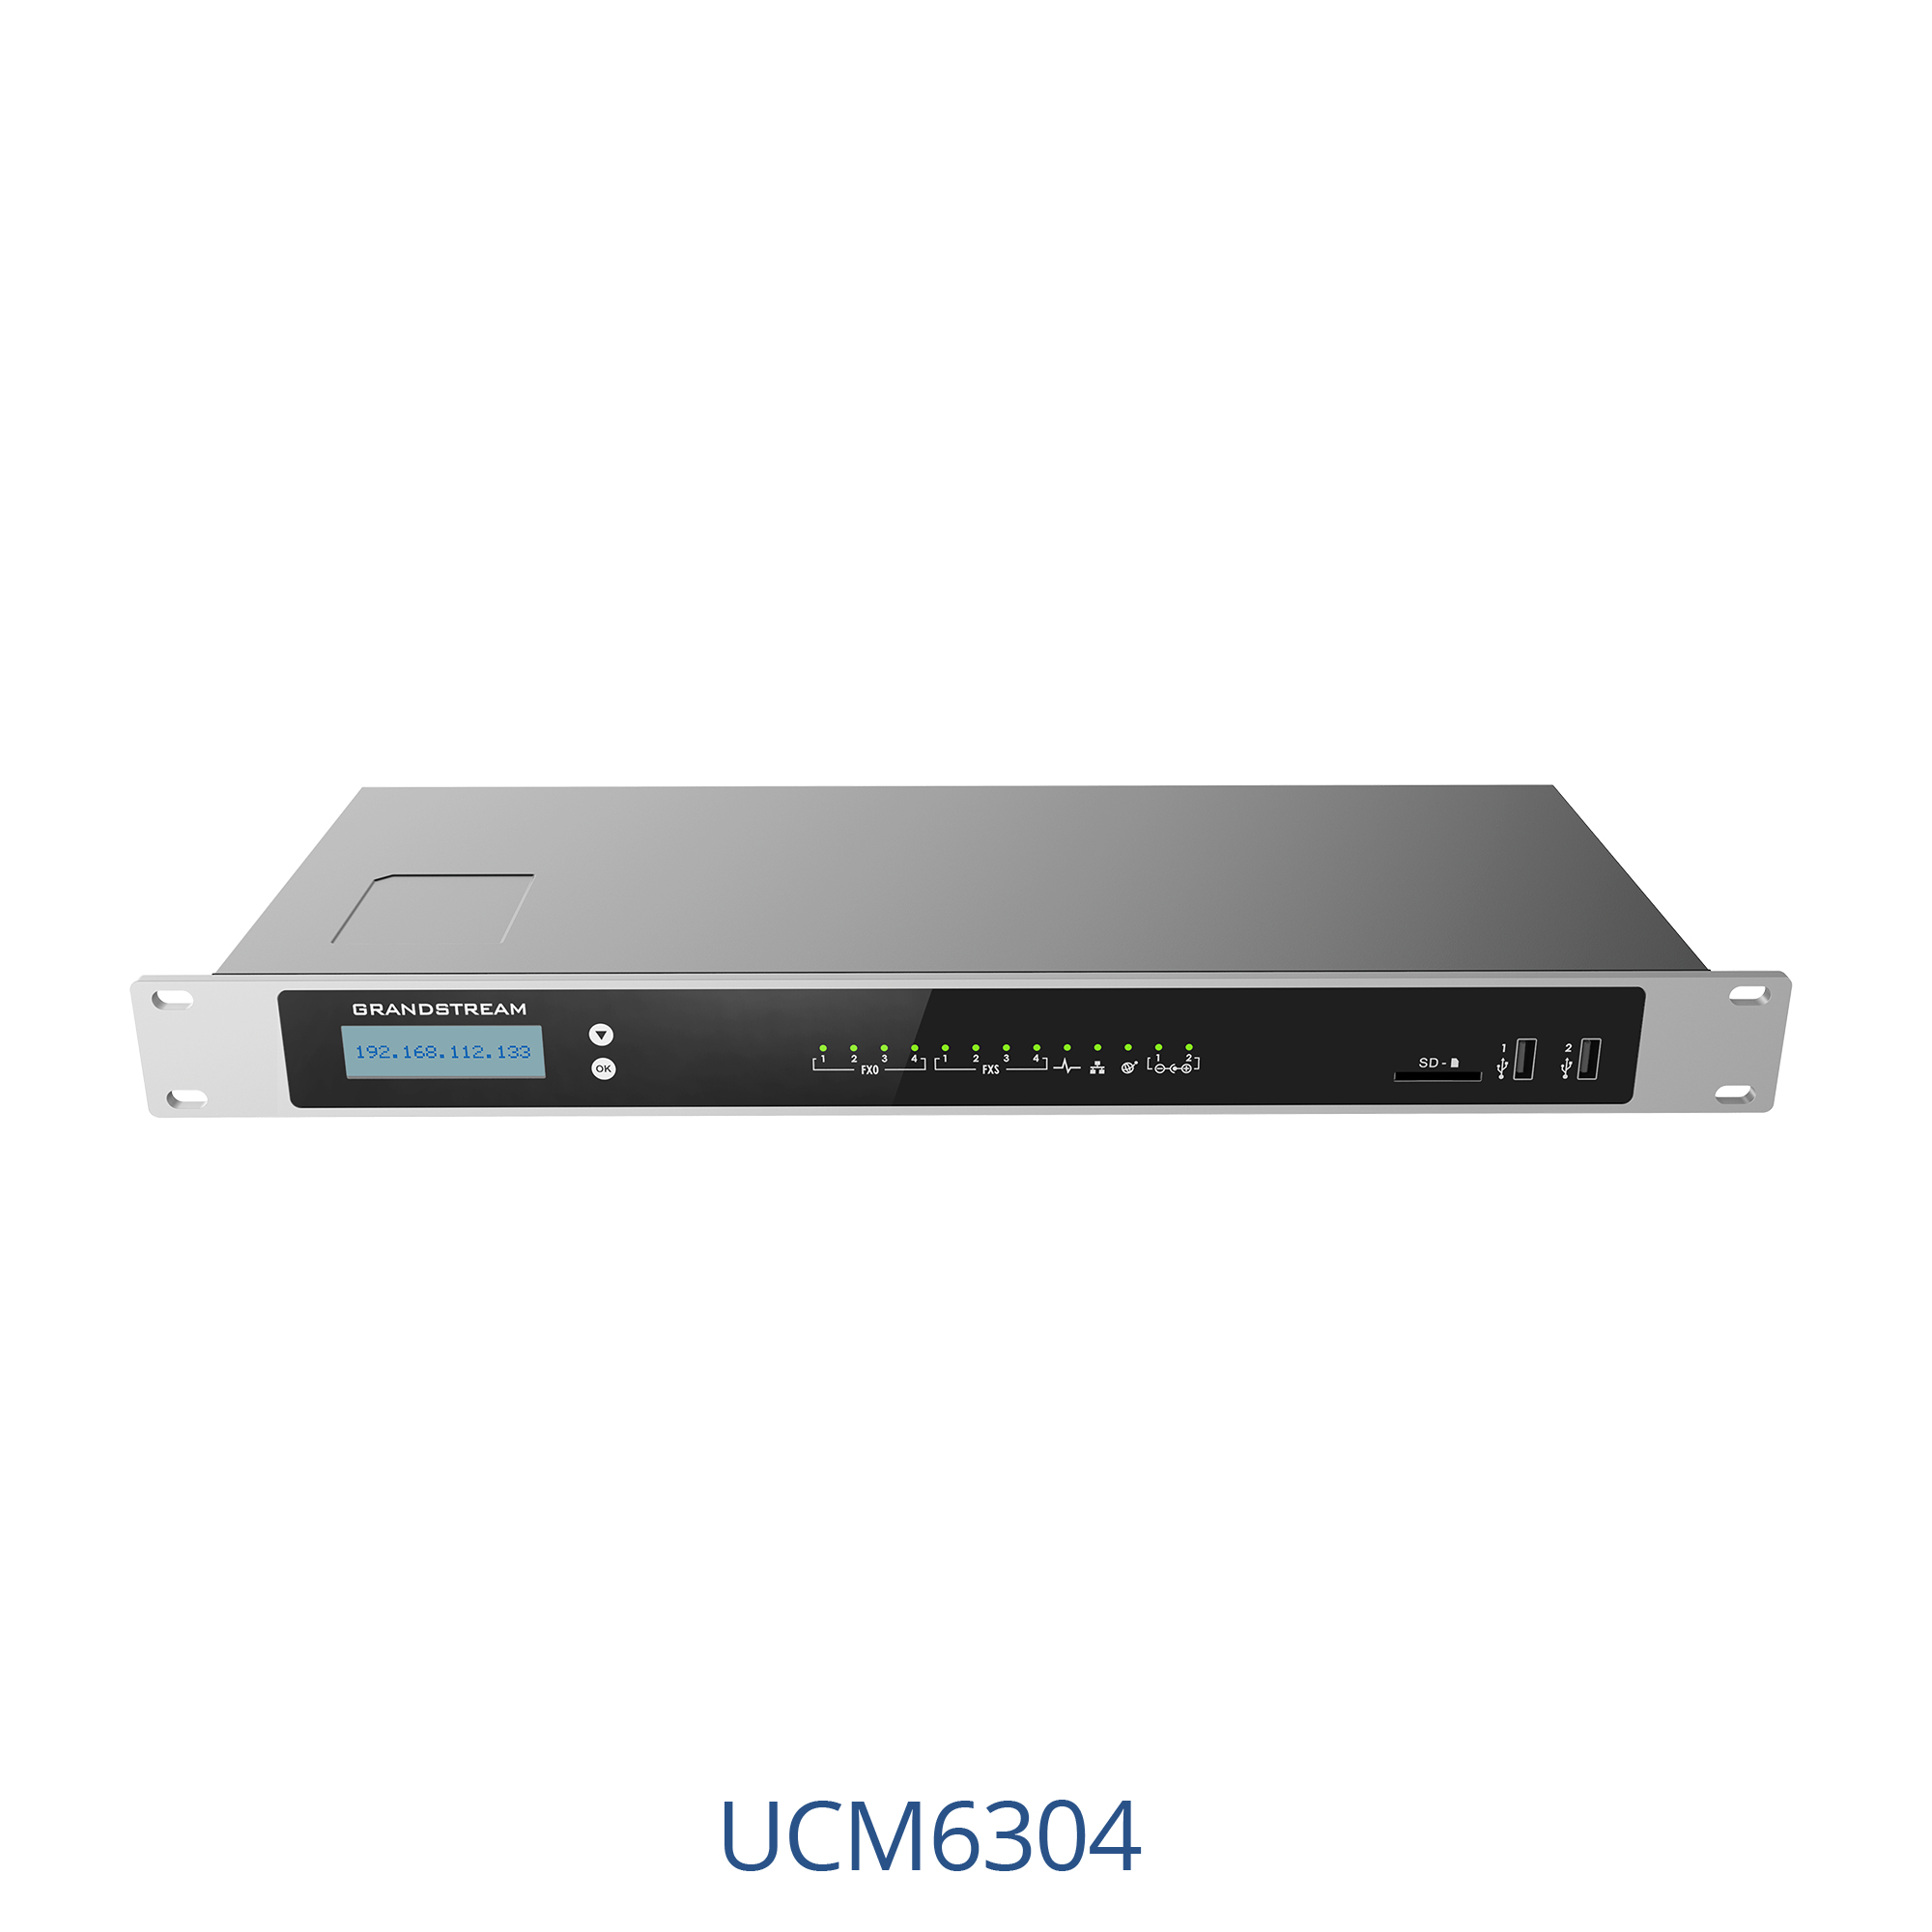 Grandstream Networks UCM6304 Private Branch Exchange (PBX) system 2000 user(s) IP Centrex (hosted/virtual IP)